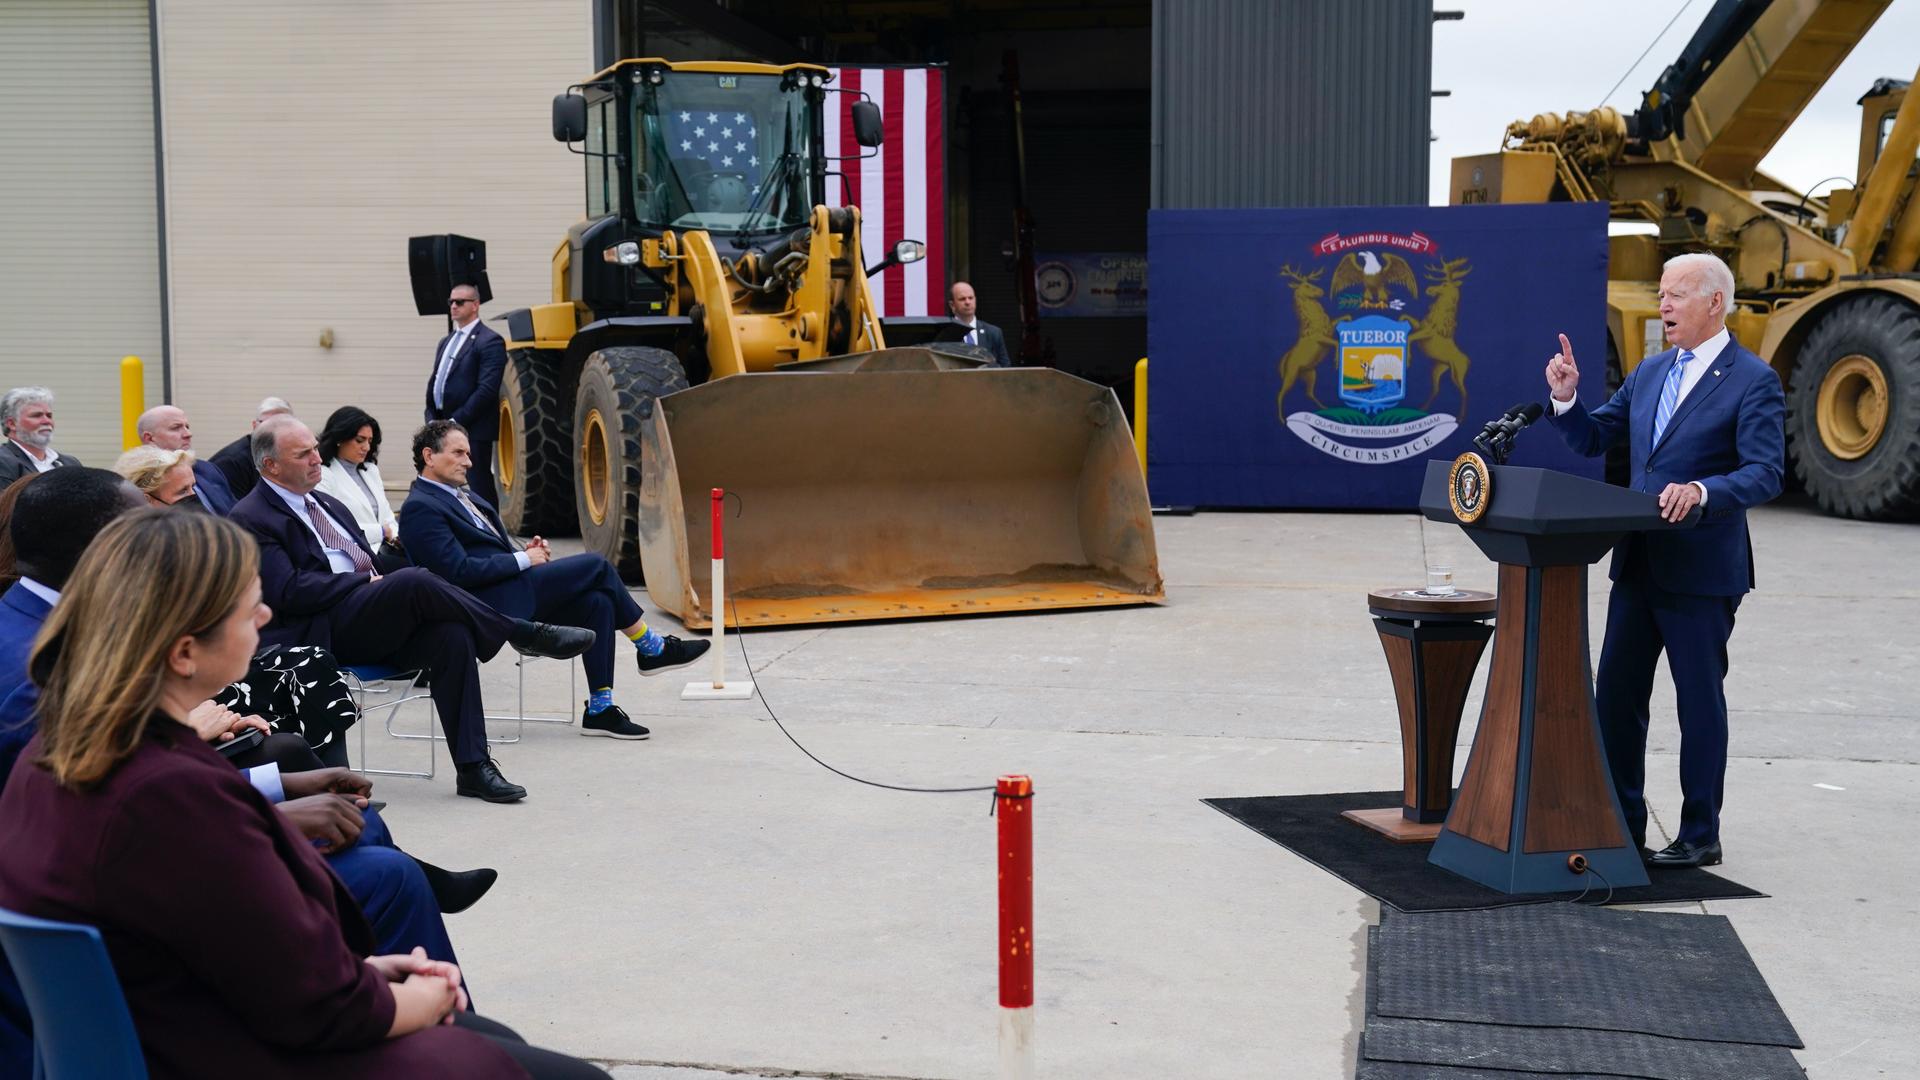 President Joe Biden delivers remarks on his "Build Back Better" agenda during a visit to the International Union Of Operating Engineers Local 324, Oct. 5, 2021, in Howell, Michigan.